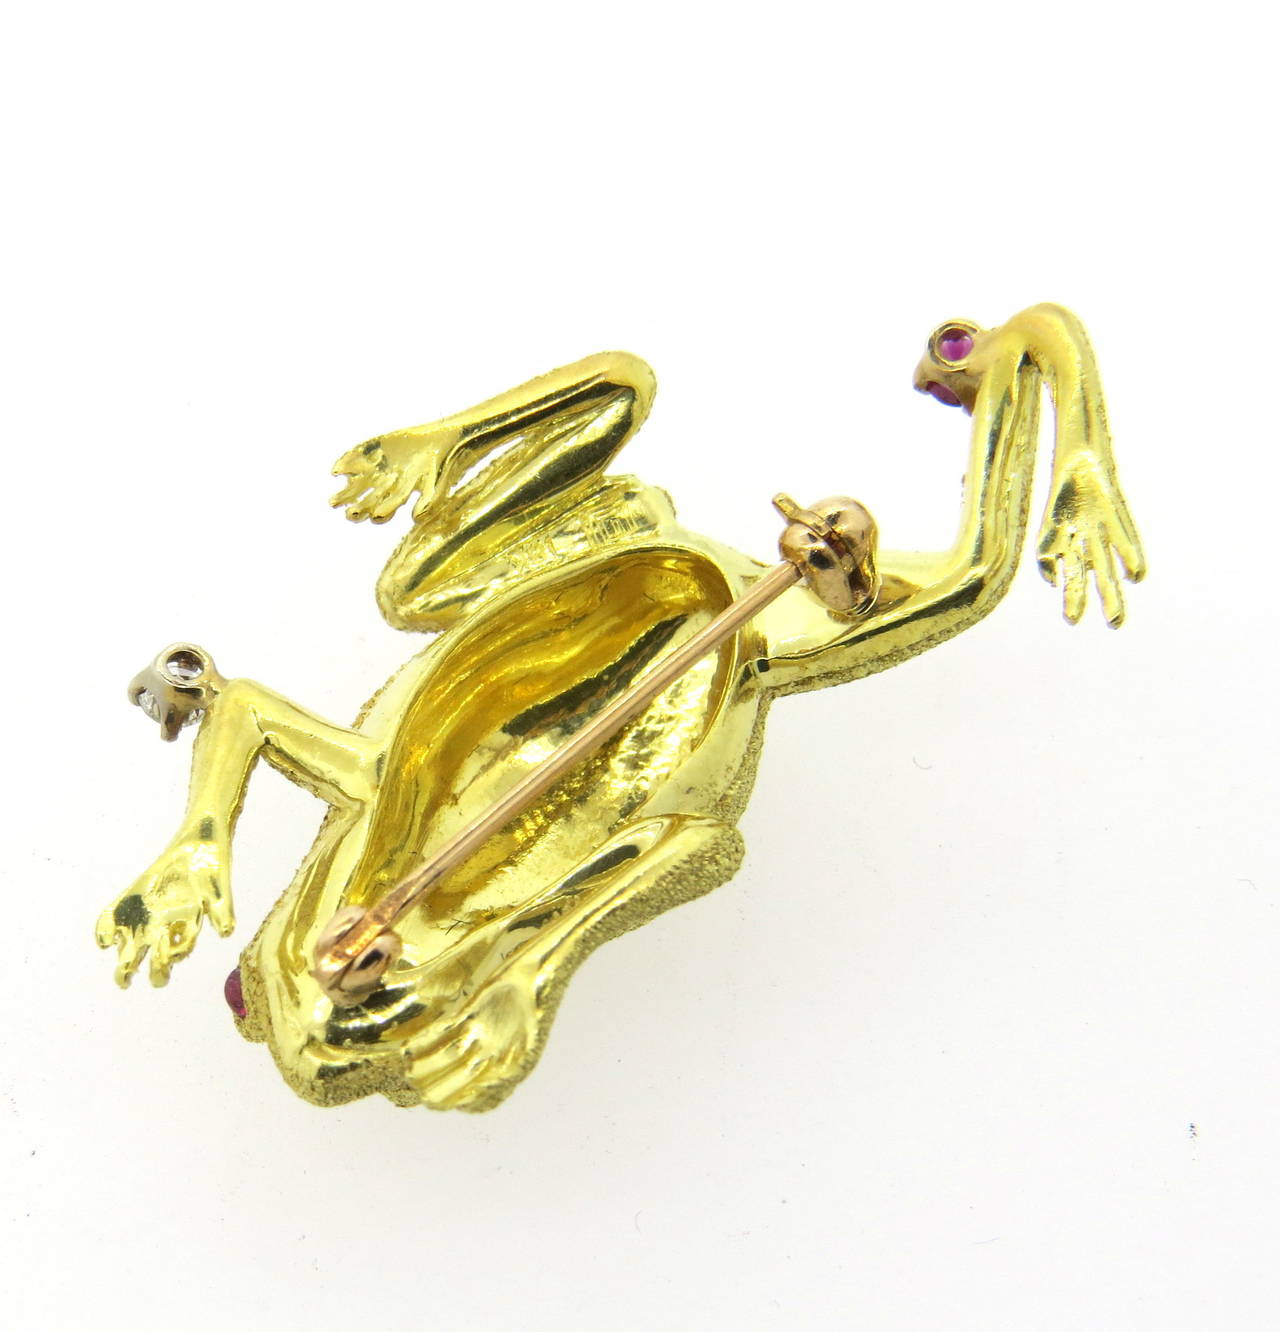 An 18k yellow gold frog pin set with ruby cabochons for eyes, and a round cut ruby on the back leg.  The piece is also adorned with a G/VS diamond weighing approximately 0.06cts.  The piece measures 38mm x 27mm and weighs 11.8 grams.